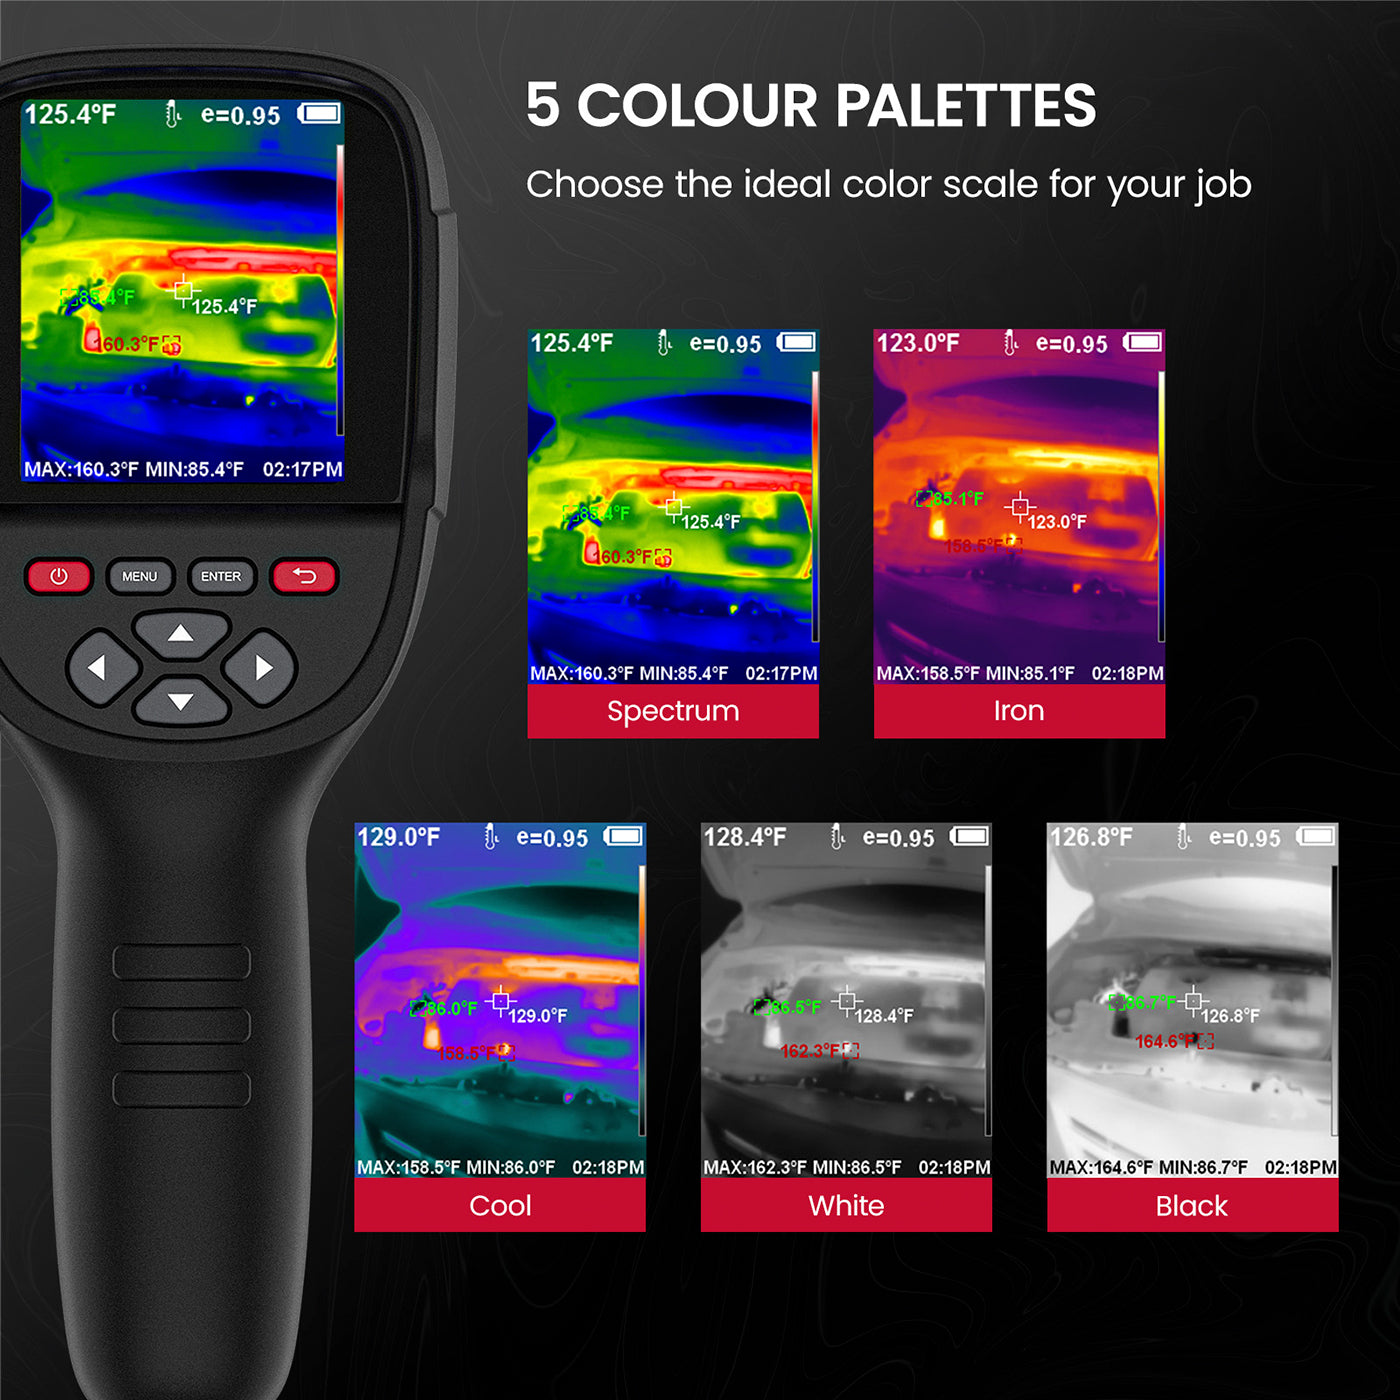 KAIWEETS thermal vision camera uses 5 color palettes